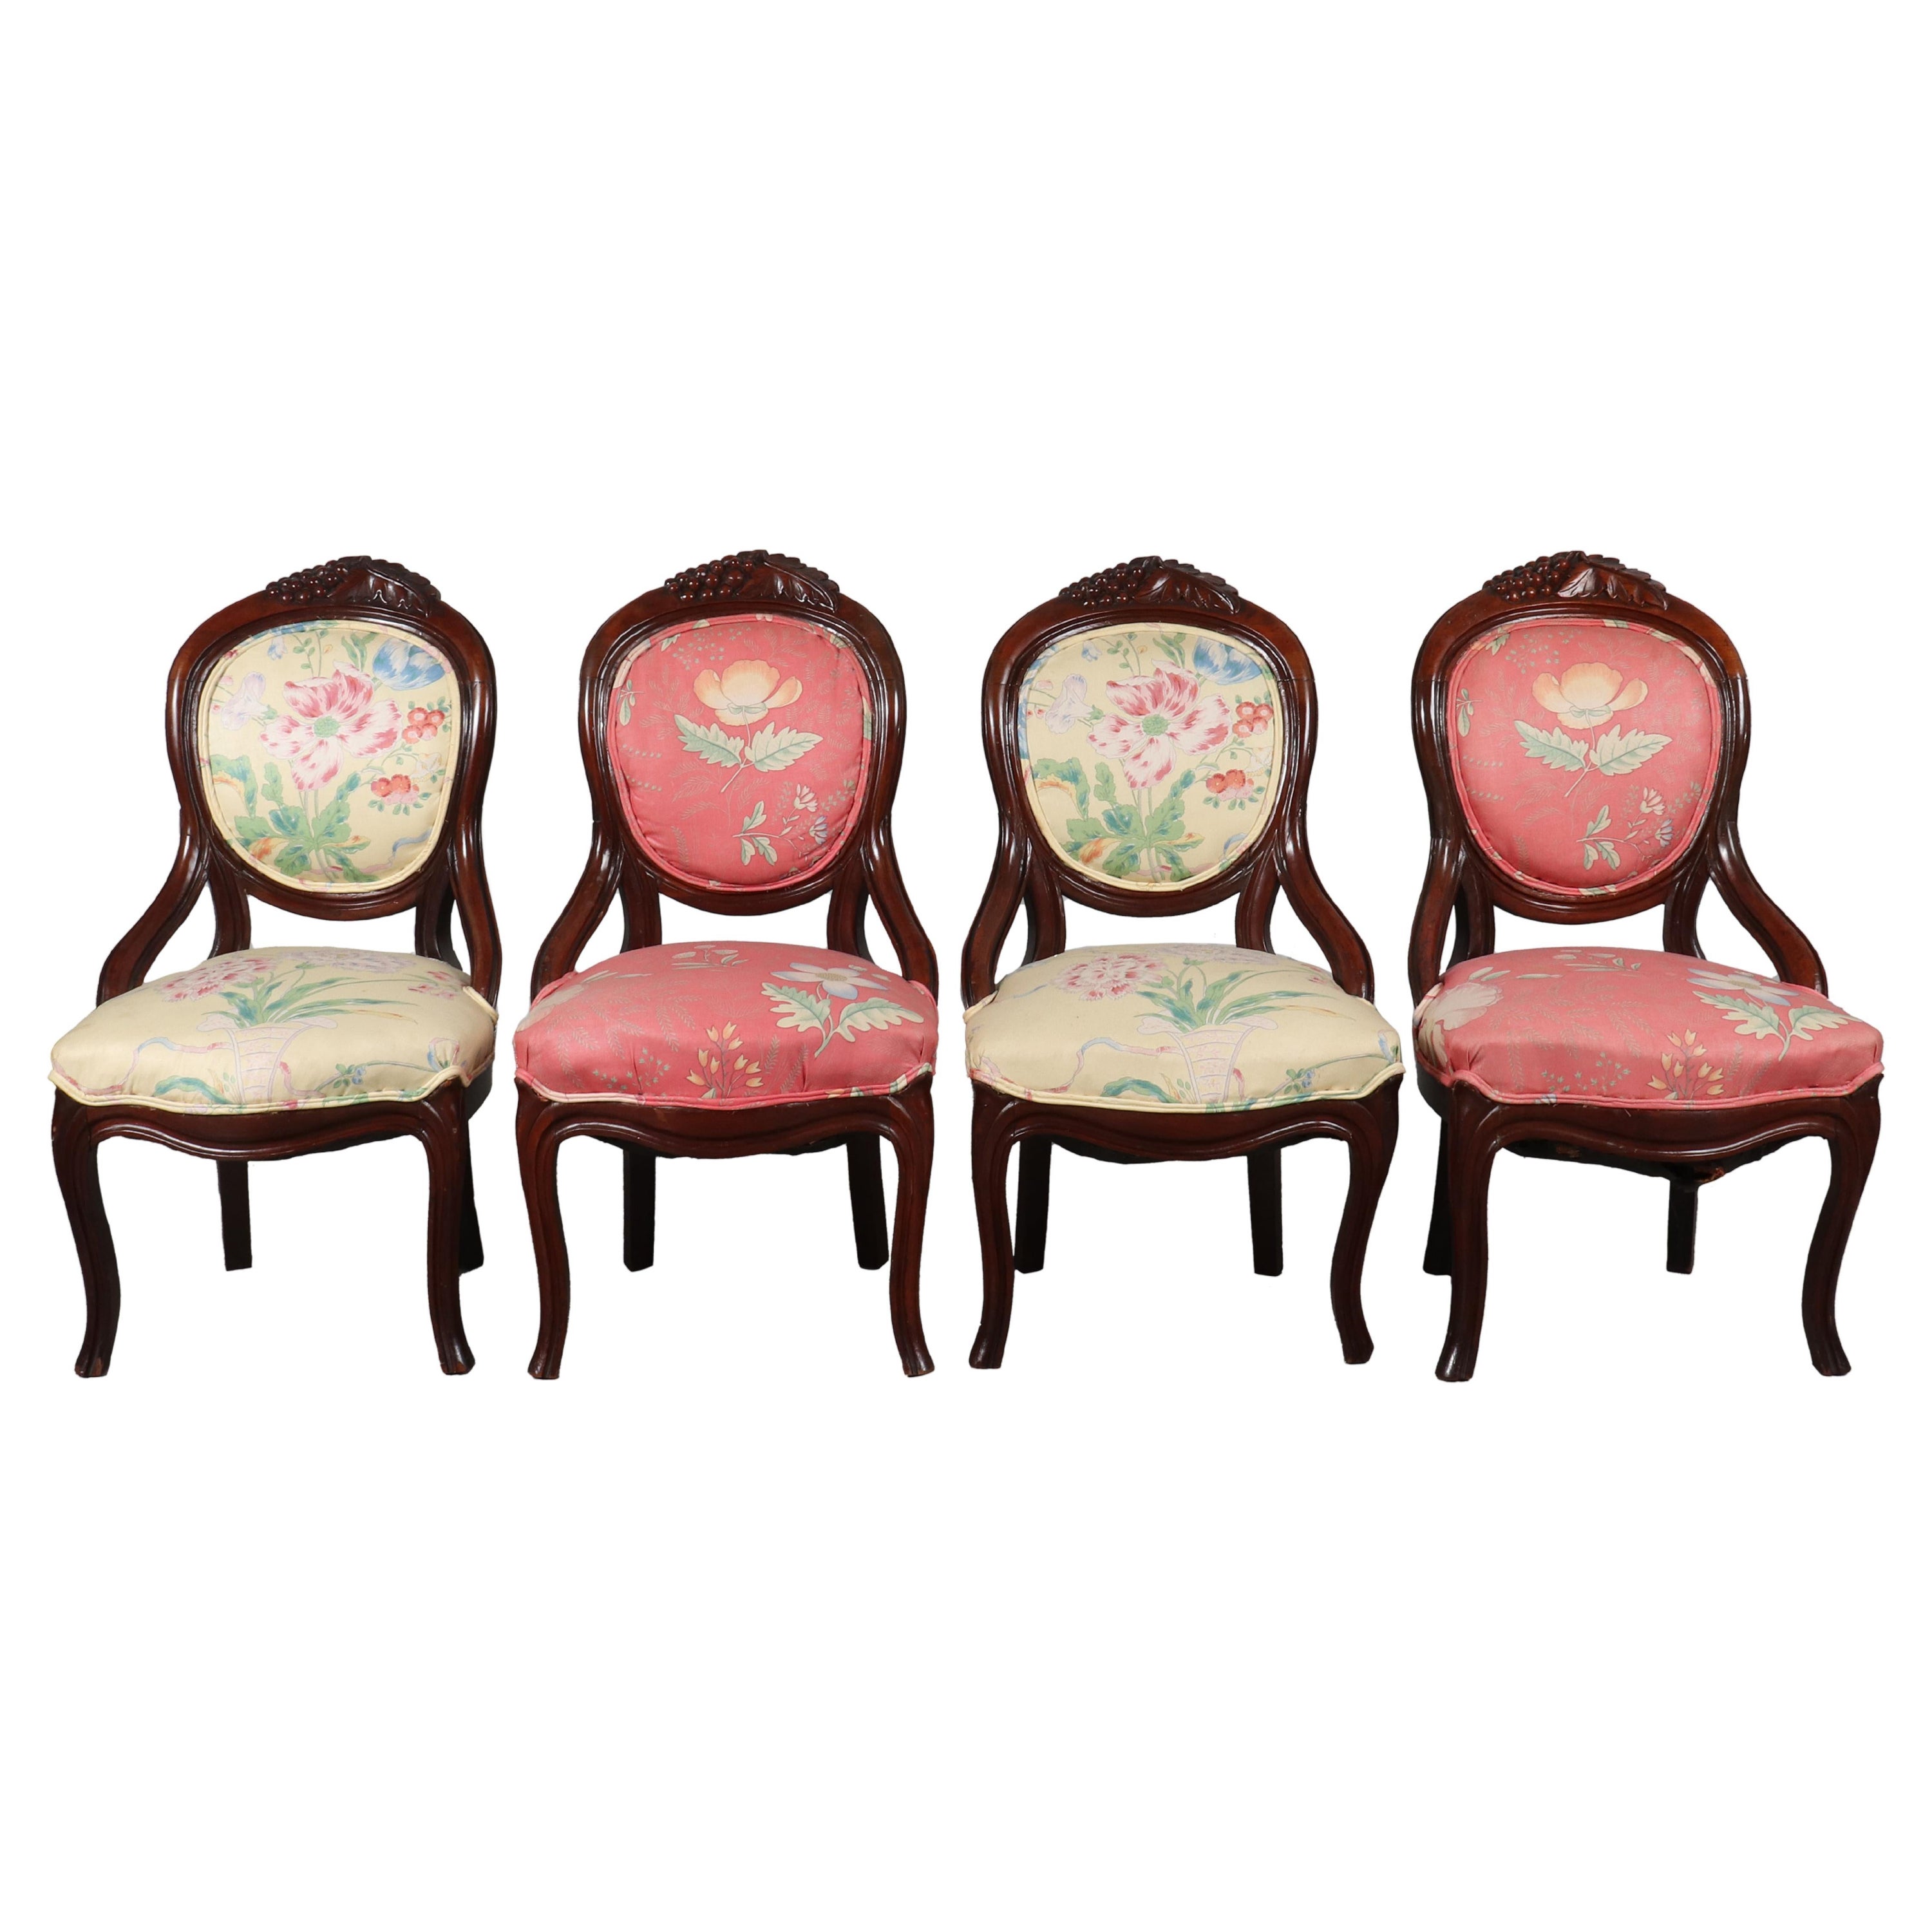 American Rococo Revival Style Wooden Chairs